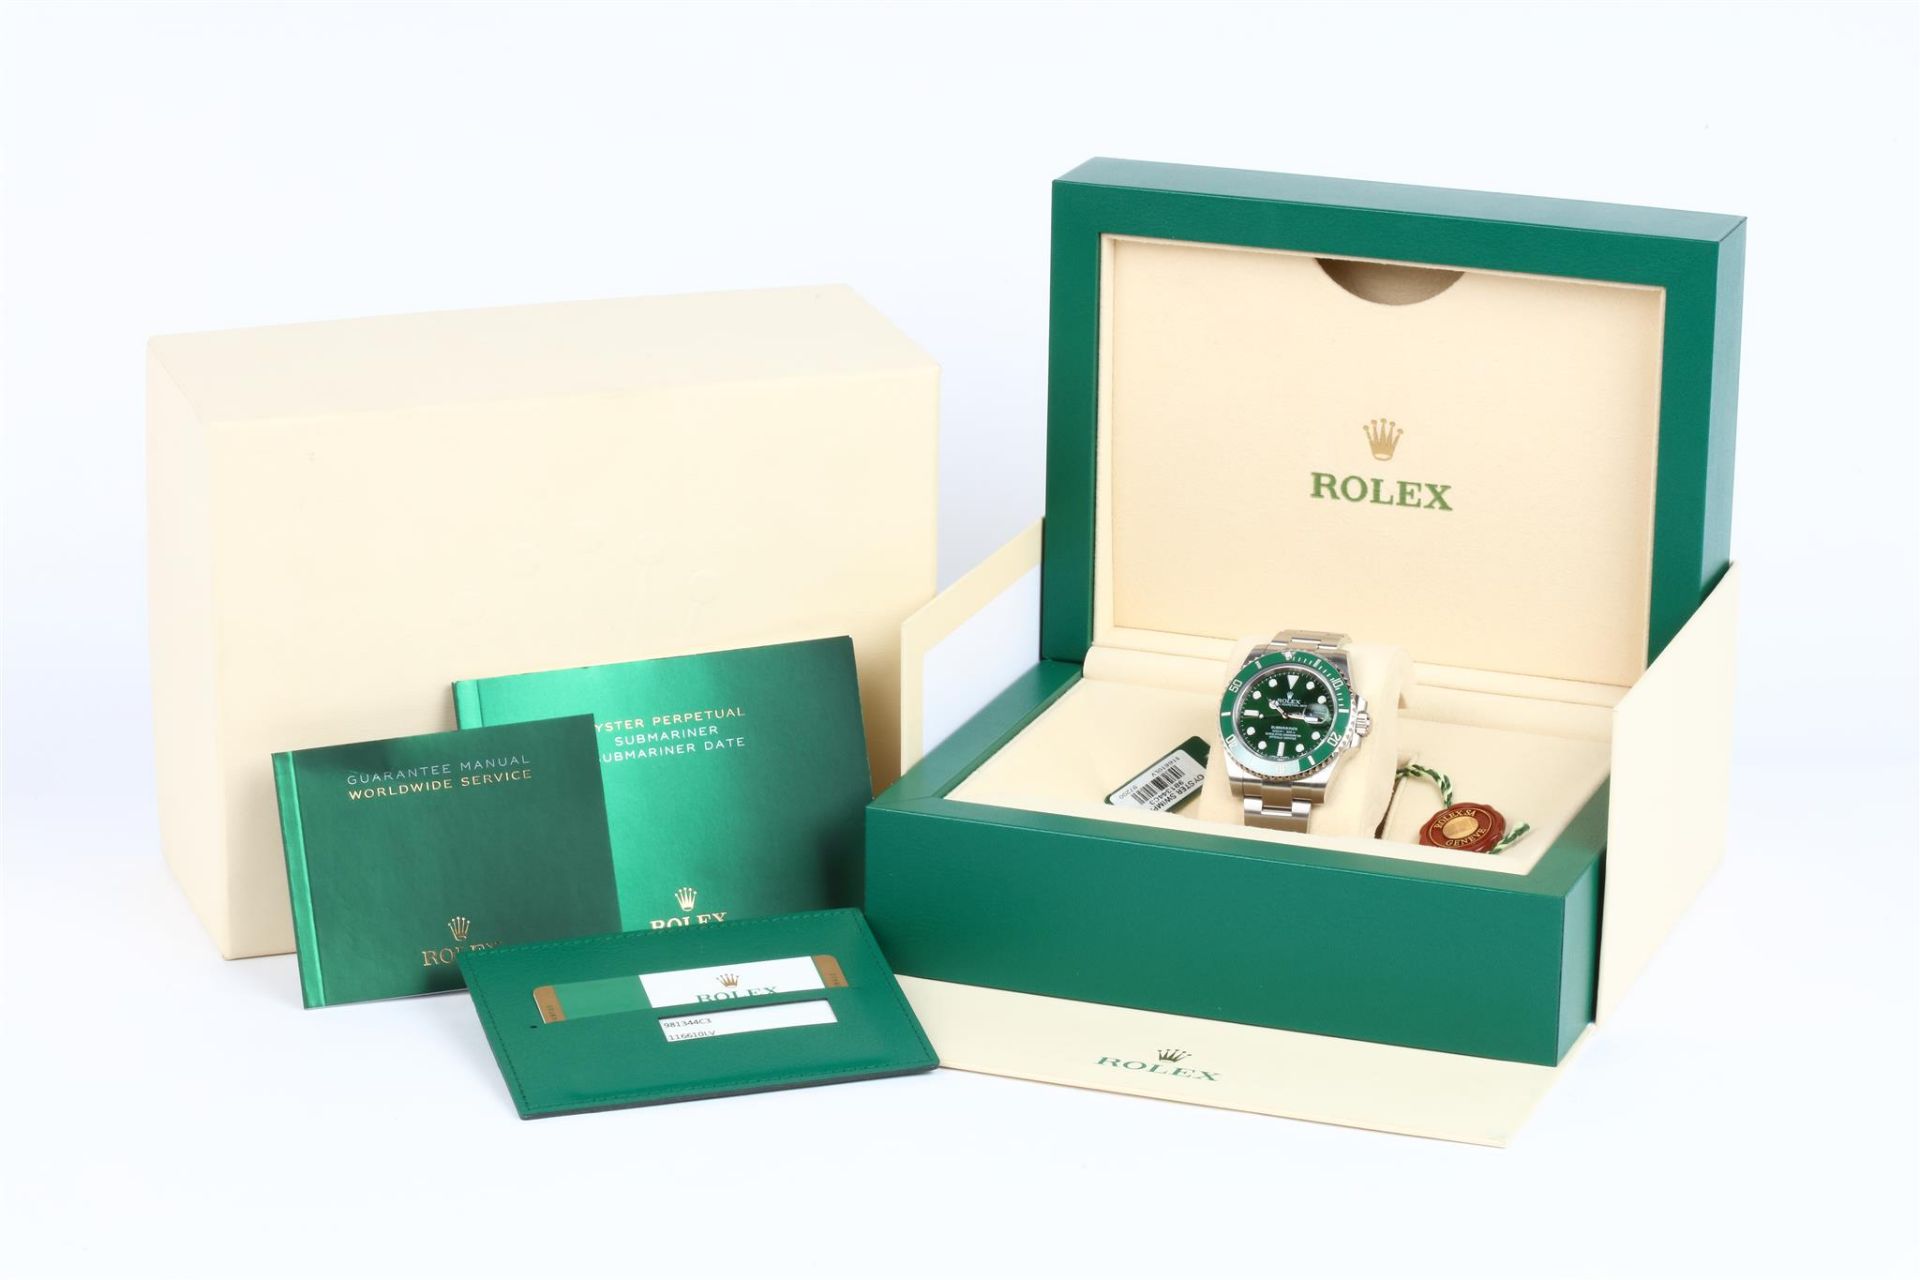 No VAT Gents Rolex Oyster Perpetual Date Submariner "Hulk" Watch - Comes With Inner And Outer Boxes - Image 4 of 7